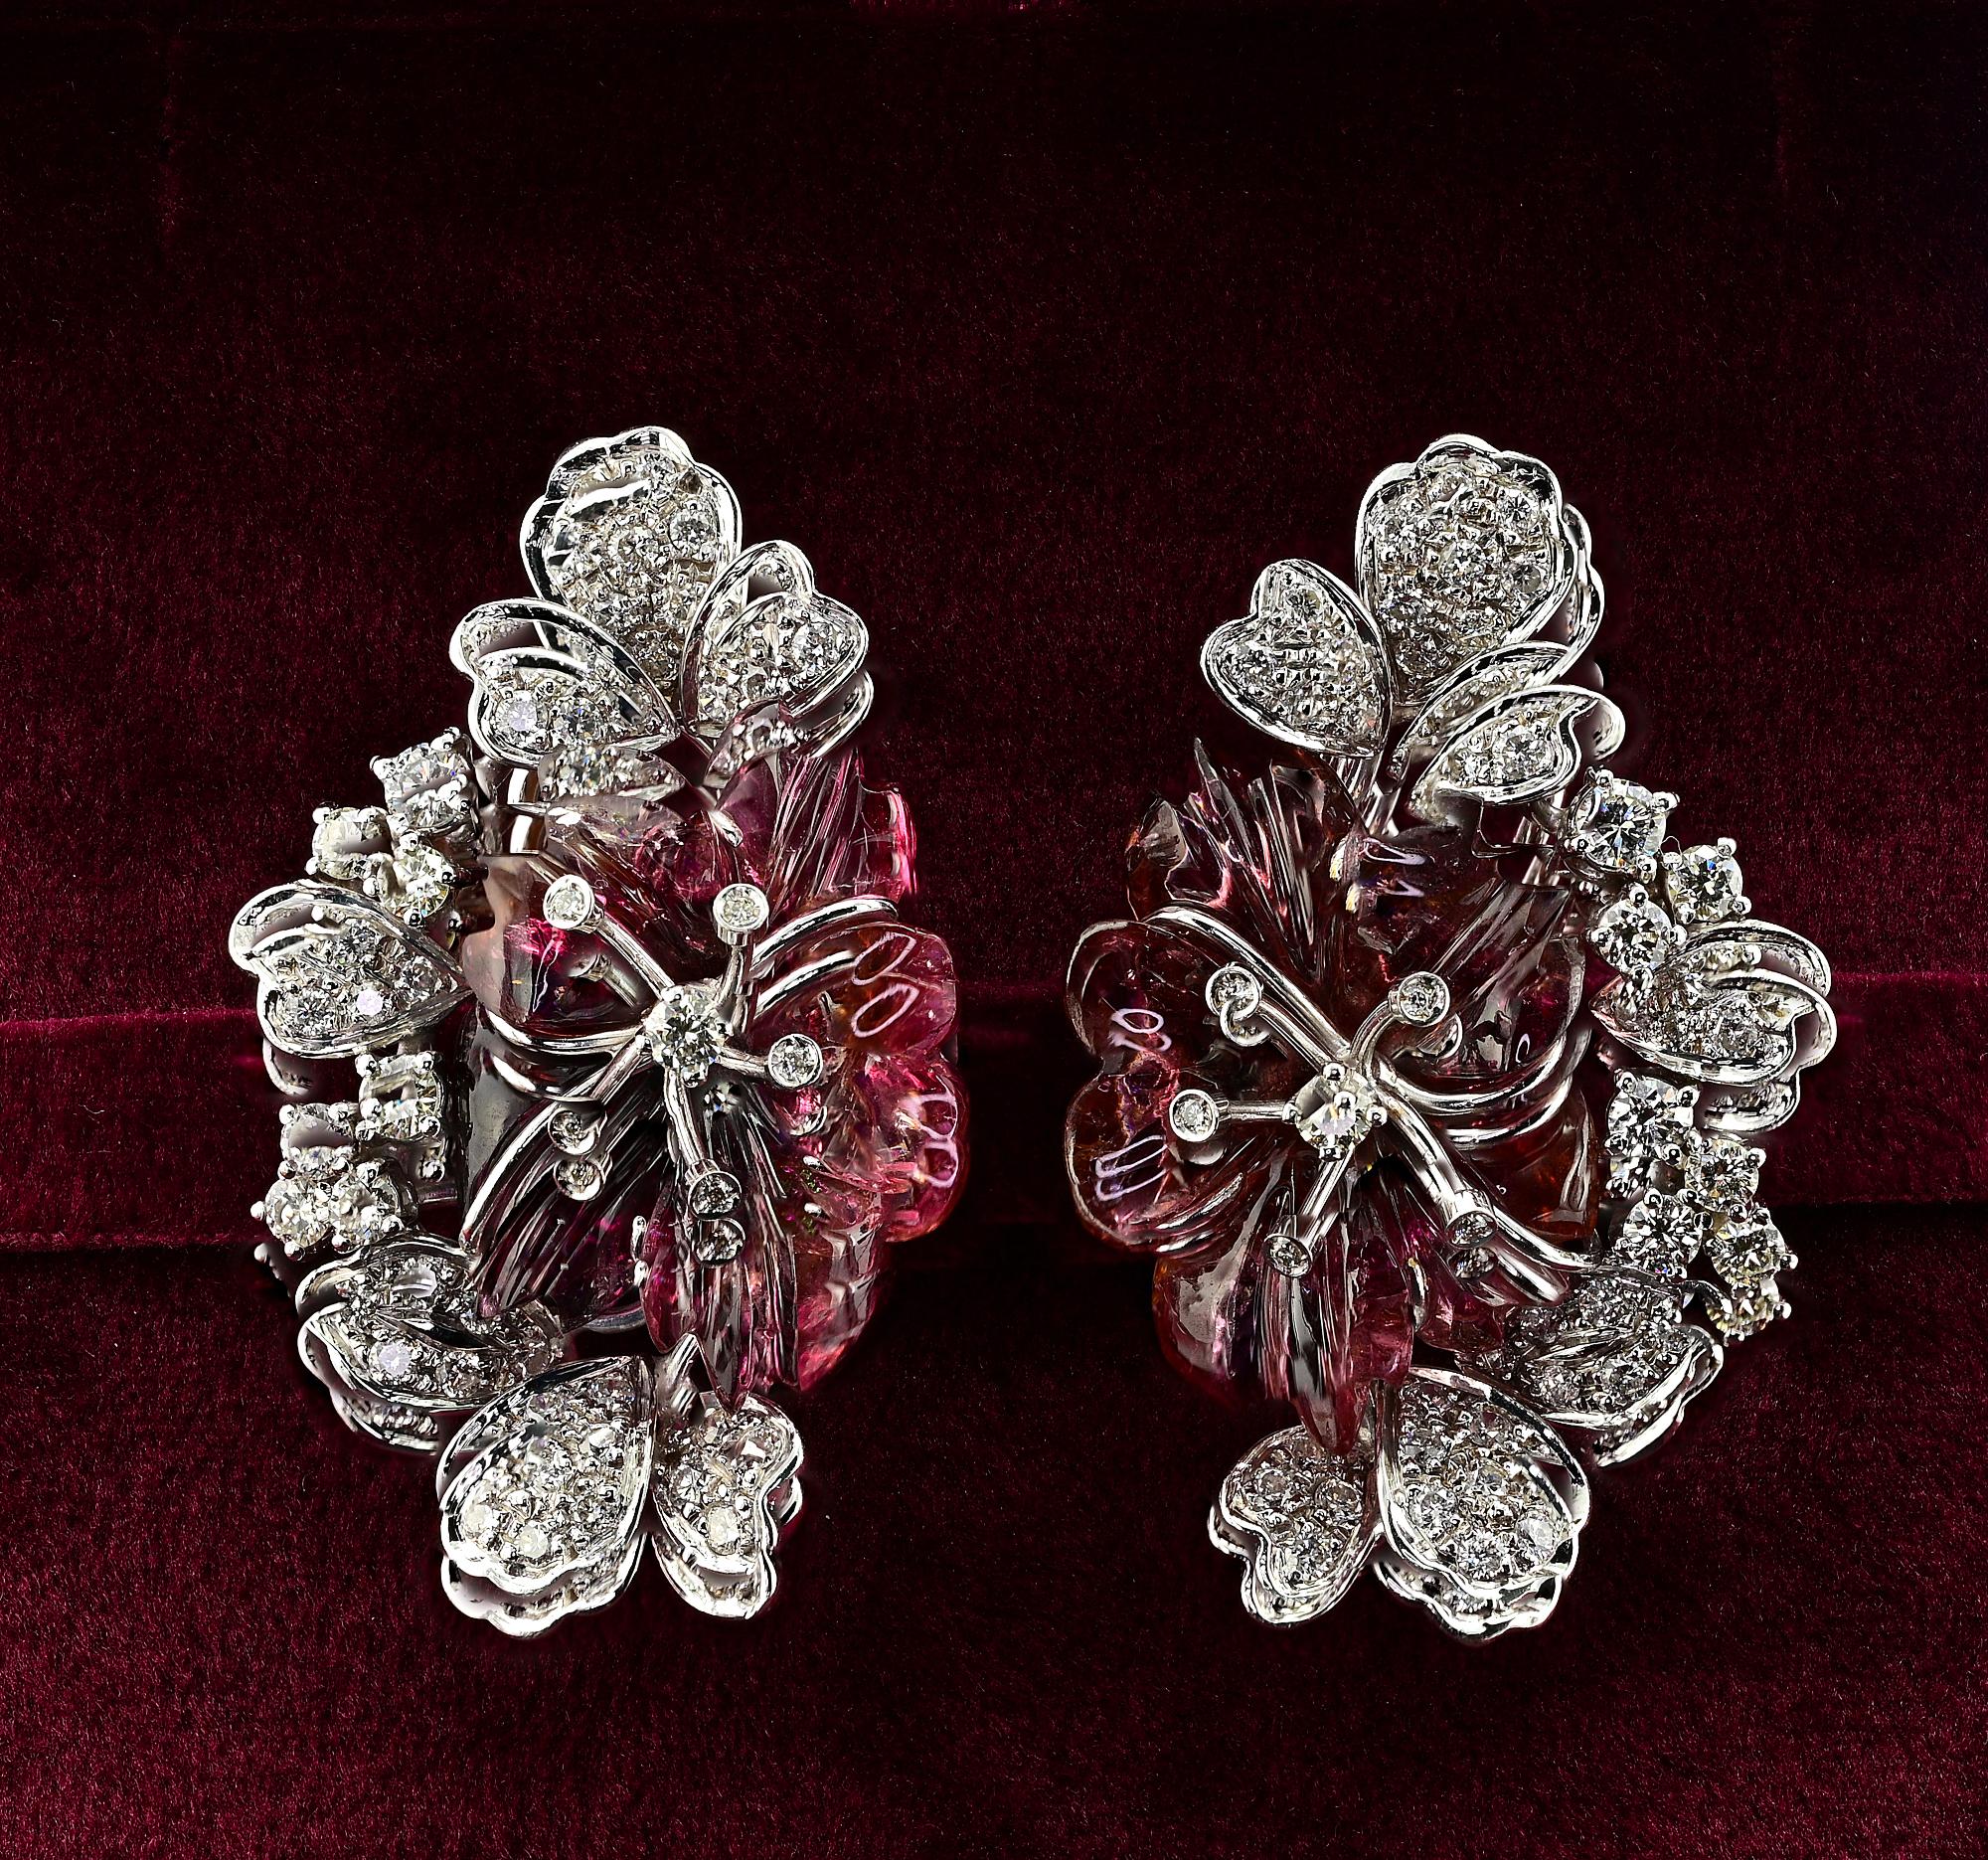 This magnificent pair of vintage earrings are 1960 circa
Skillfully Hand crafted of solid 18 KT white gold in awesome flowers and leaf design
They take inspiration by the beautiful hand carved natural Tourmaline of gorgeous water melon